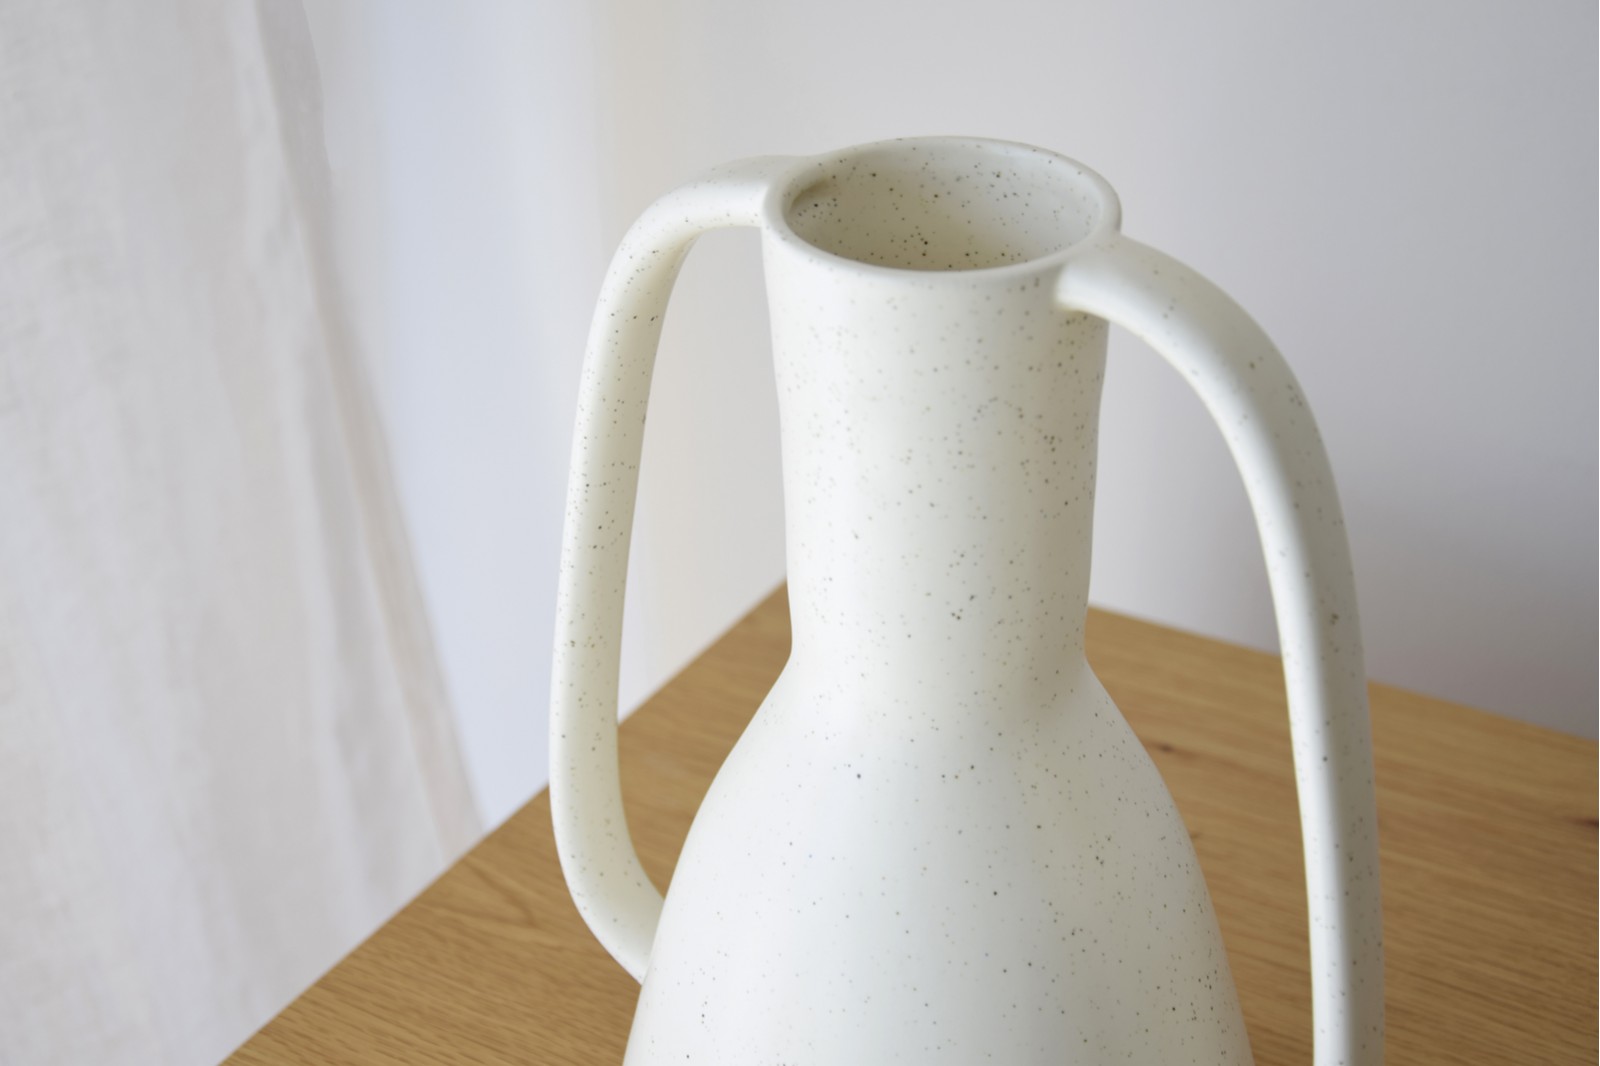 HANDLES COLLECTION: CERAMIC VASES WHITE GREEN